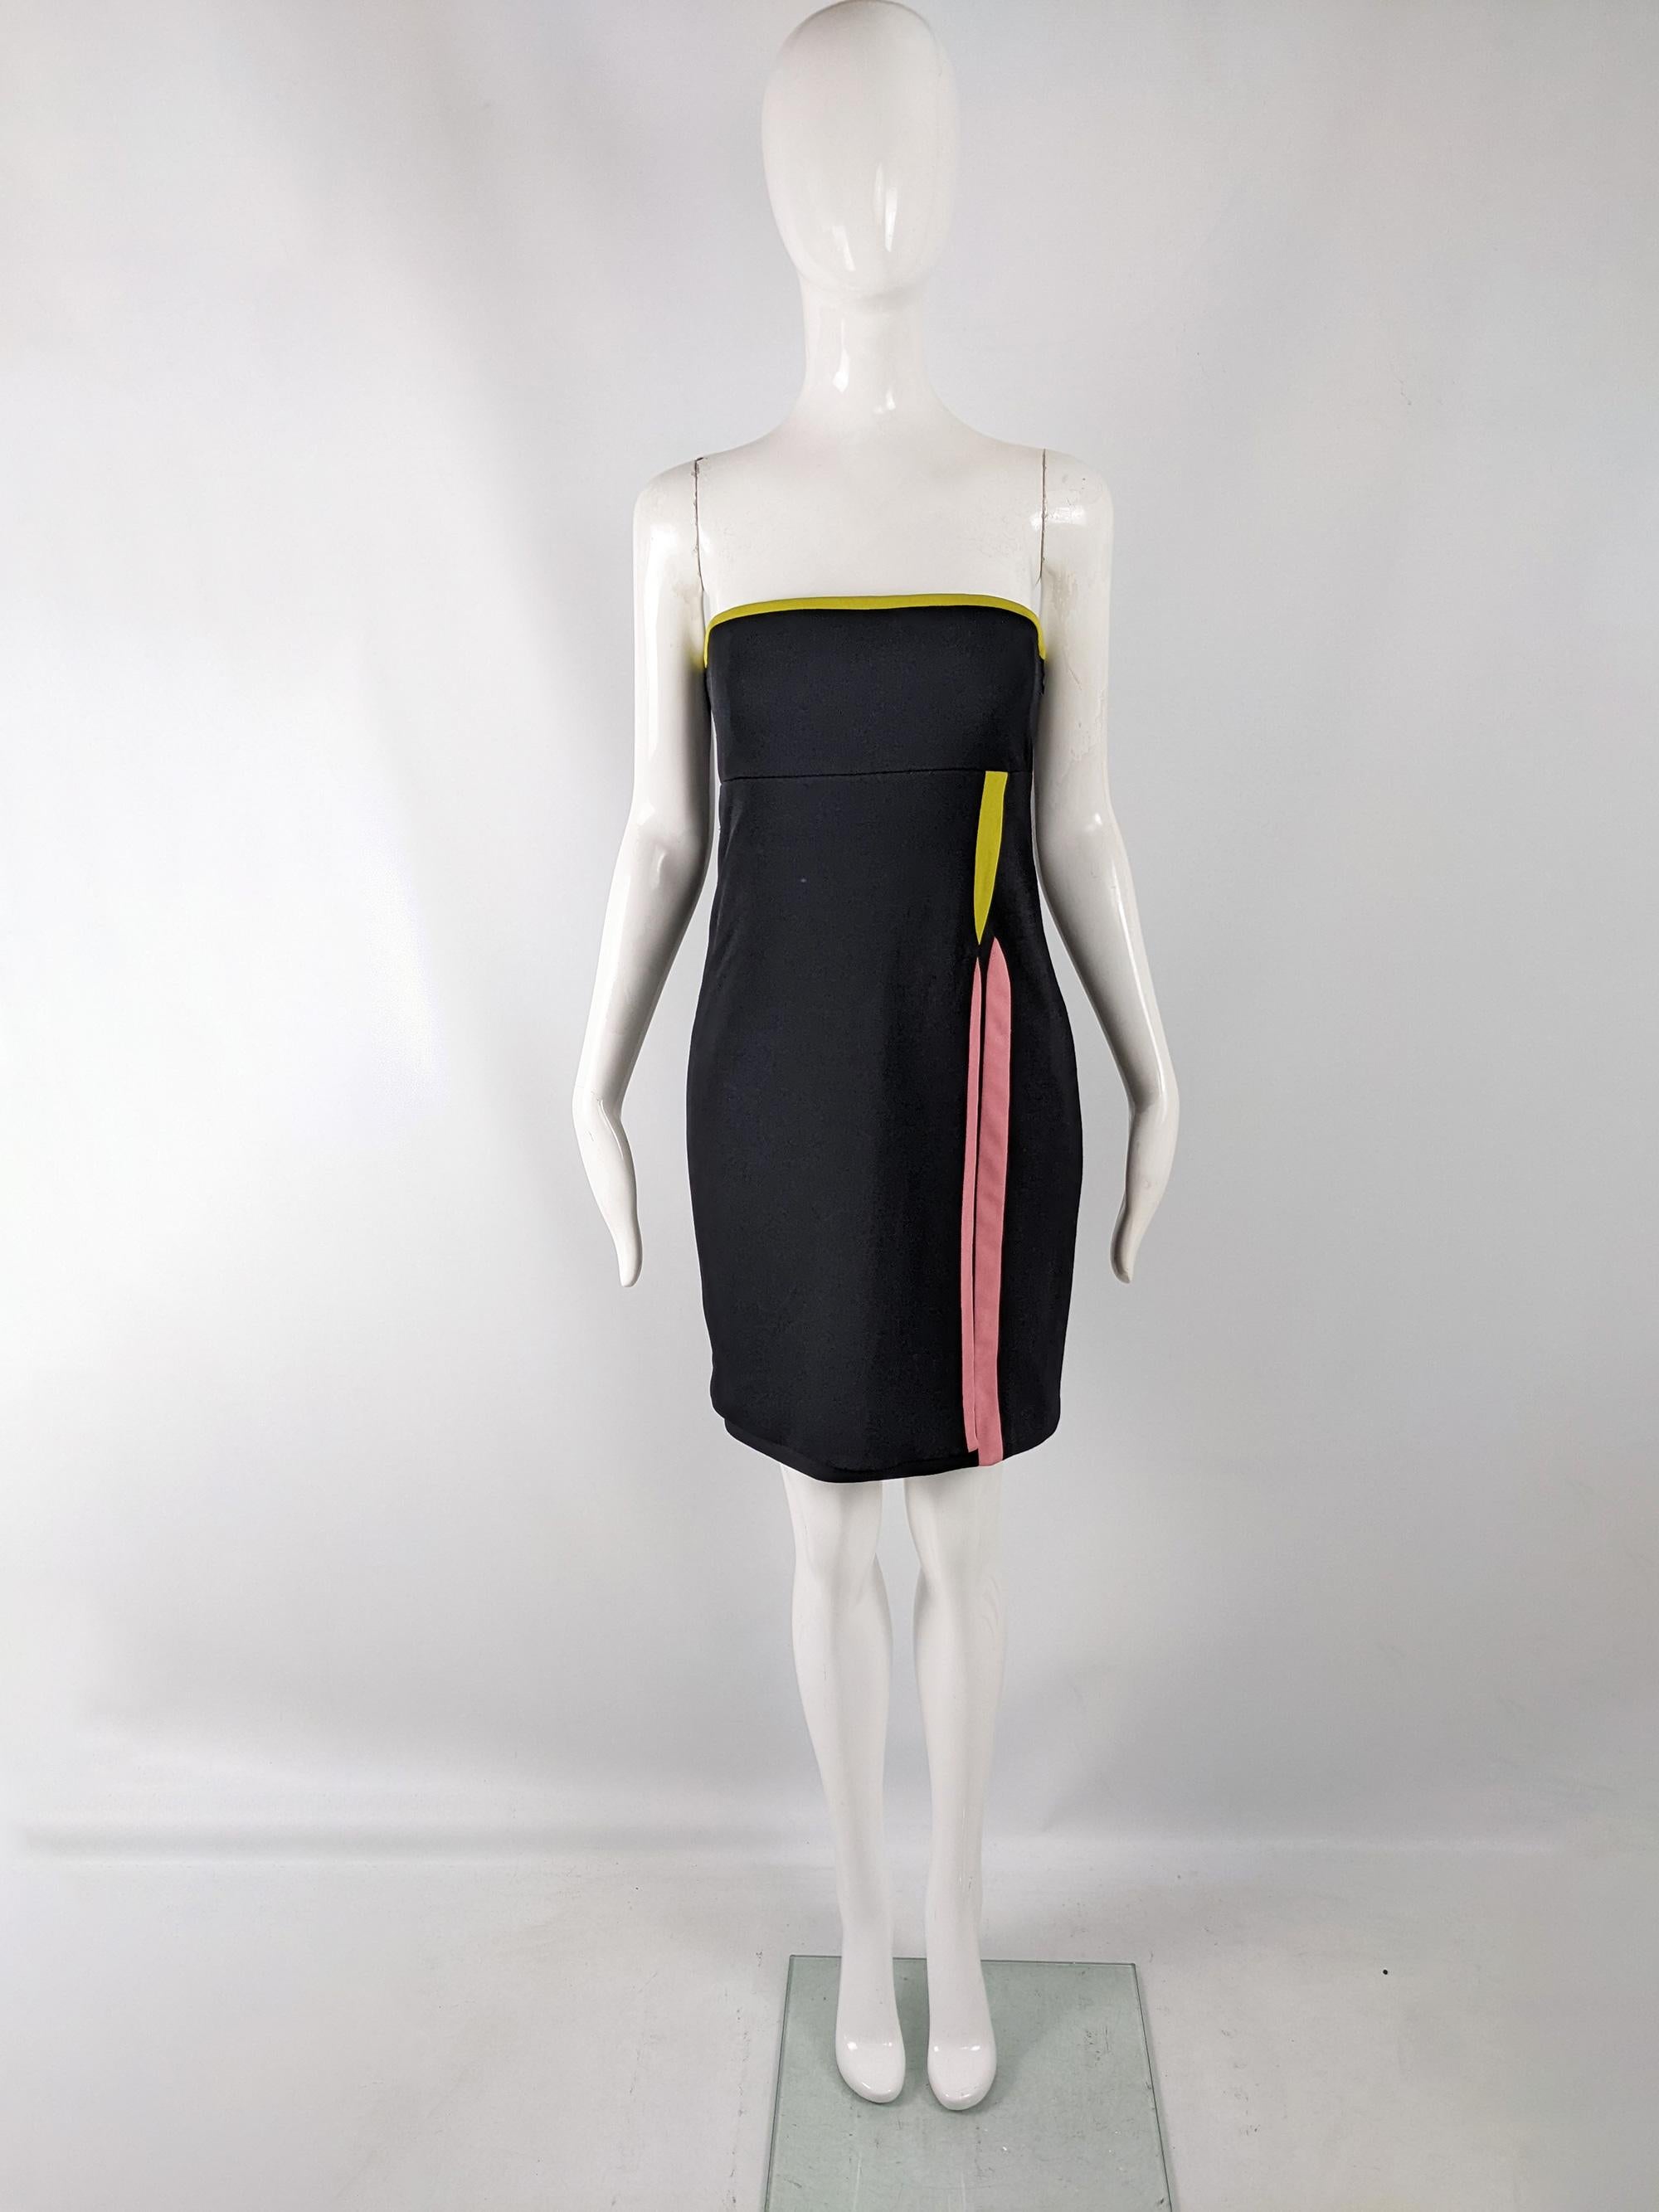 A fabulous and rare vintage womens party dress from the 1997 Fall collection by Gianni Versace (as seen on the runway). In a black wool, rayon and silk blend fabric with a strapless fit, built in corset in the bodice and lime green and pink